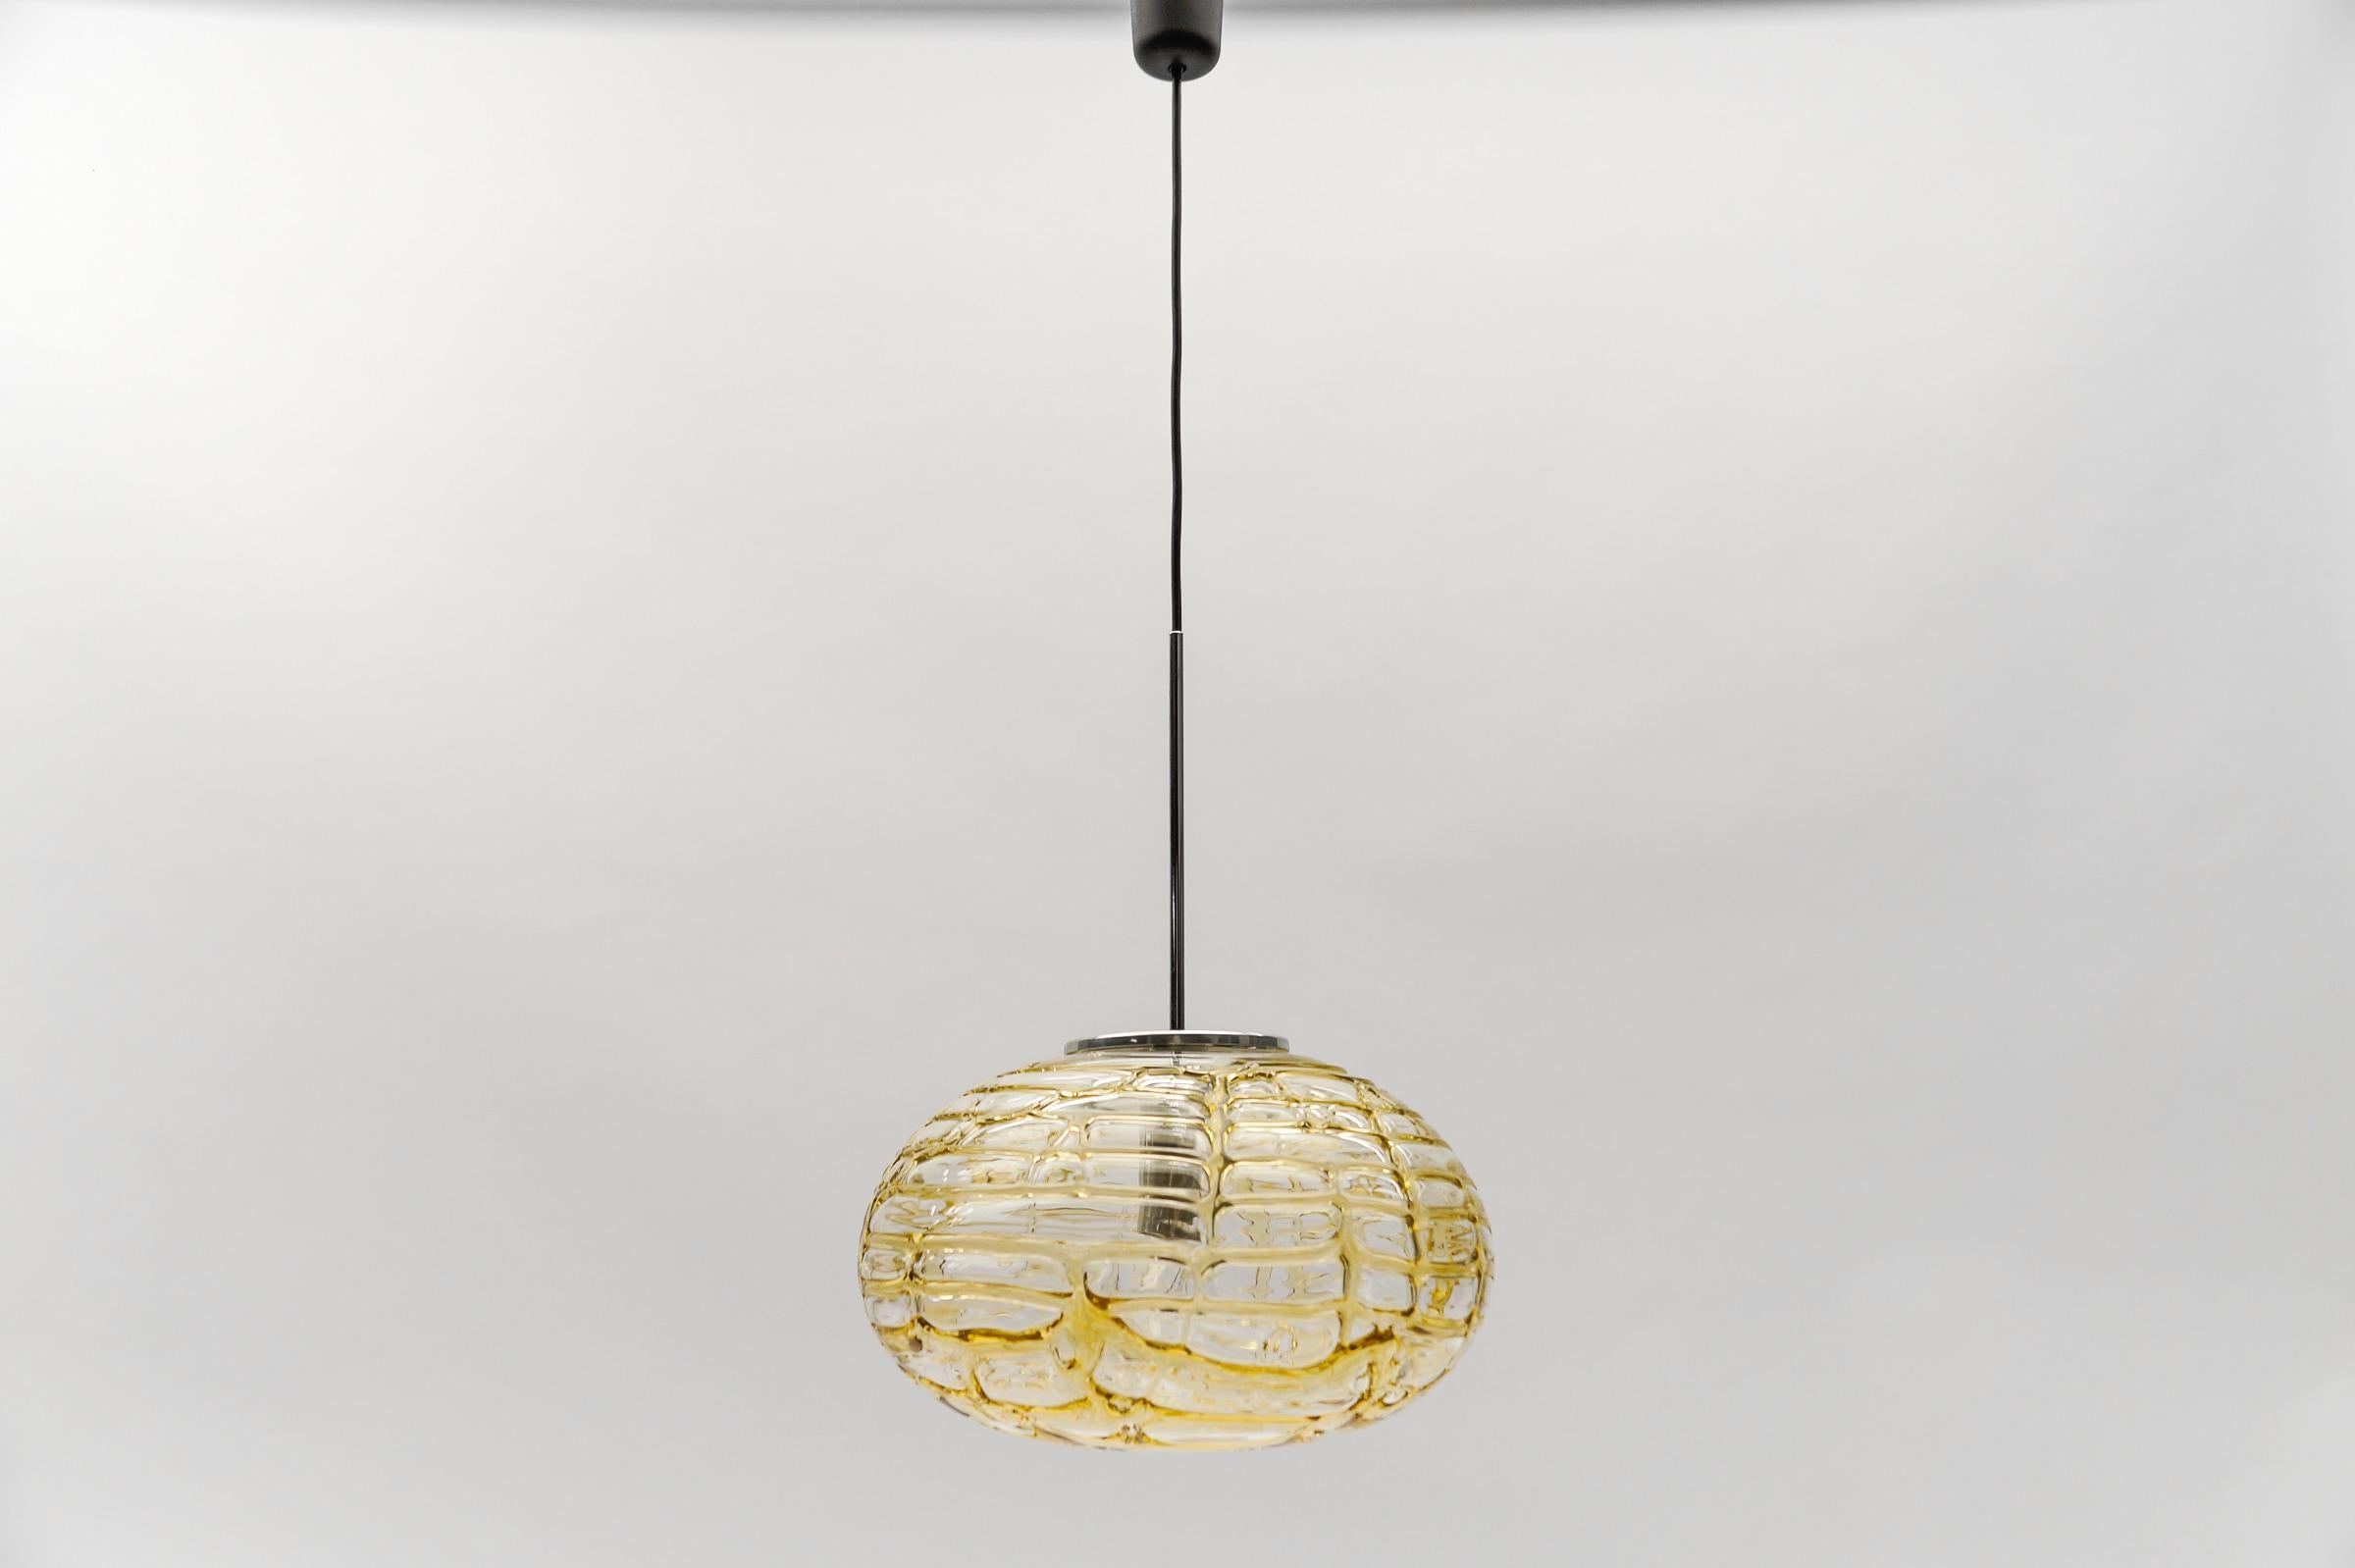 Yellow Oval Murano Glass Ball Pendant Lamp by Doria, 1960s Germany

Dimensions
Diameter: 14.96 in. (38 cm)
Height: 37.40 in. (95 cm)

One E27 socket. Works with 220V and 110V.

Our lamps are checked, cleaned and are suitable for use in the USA.